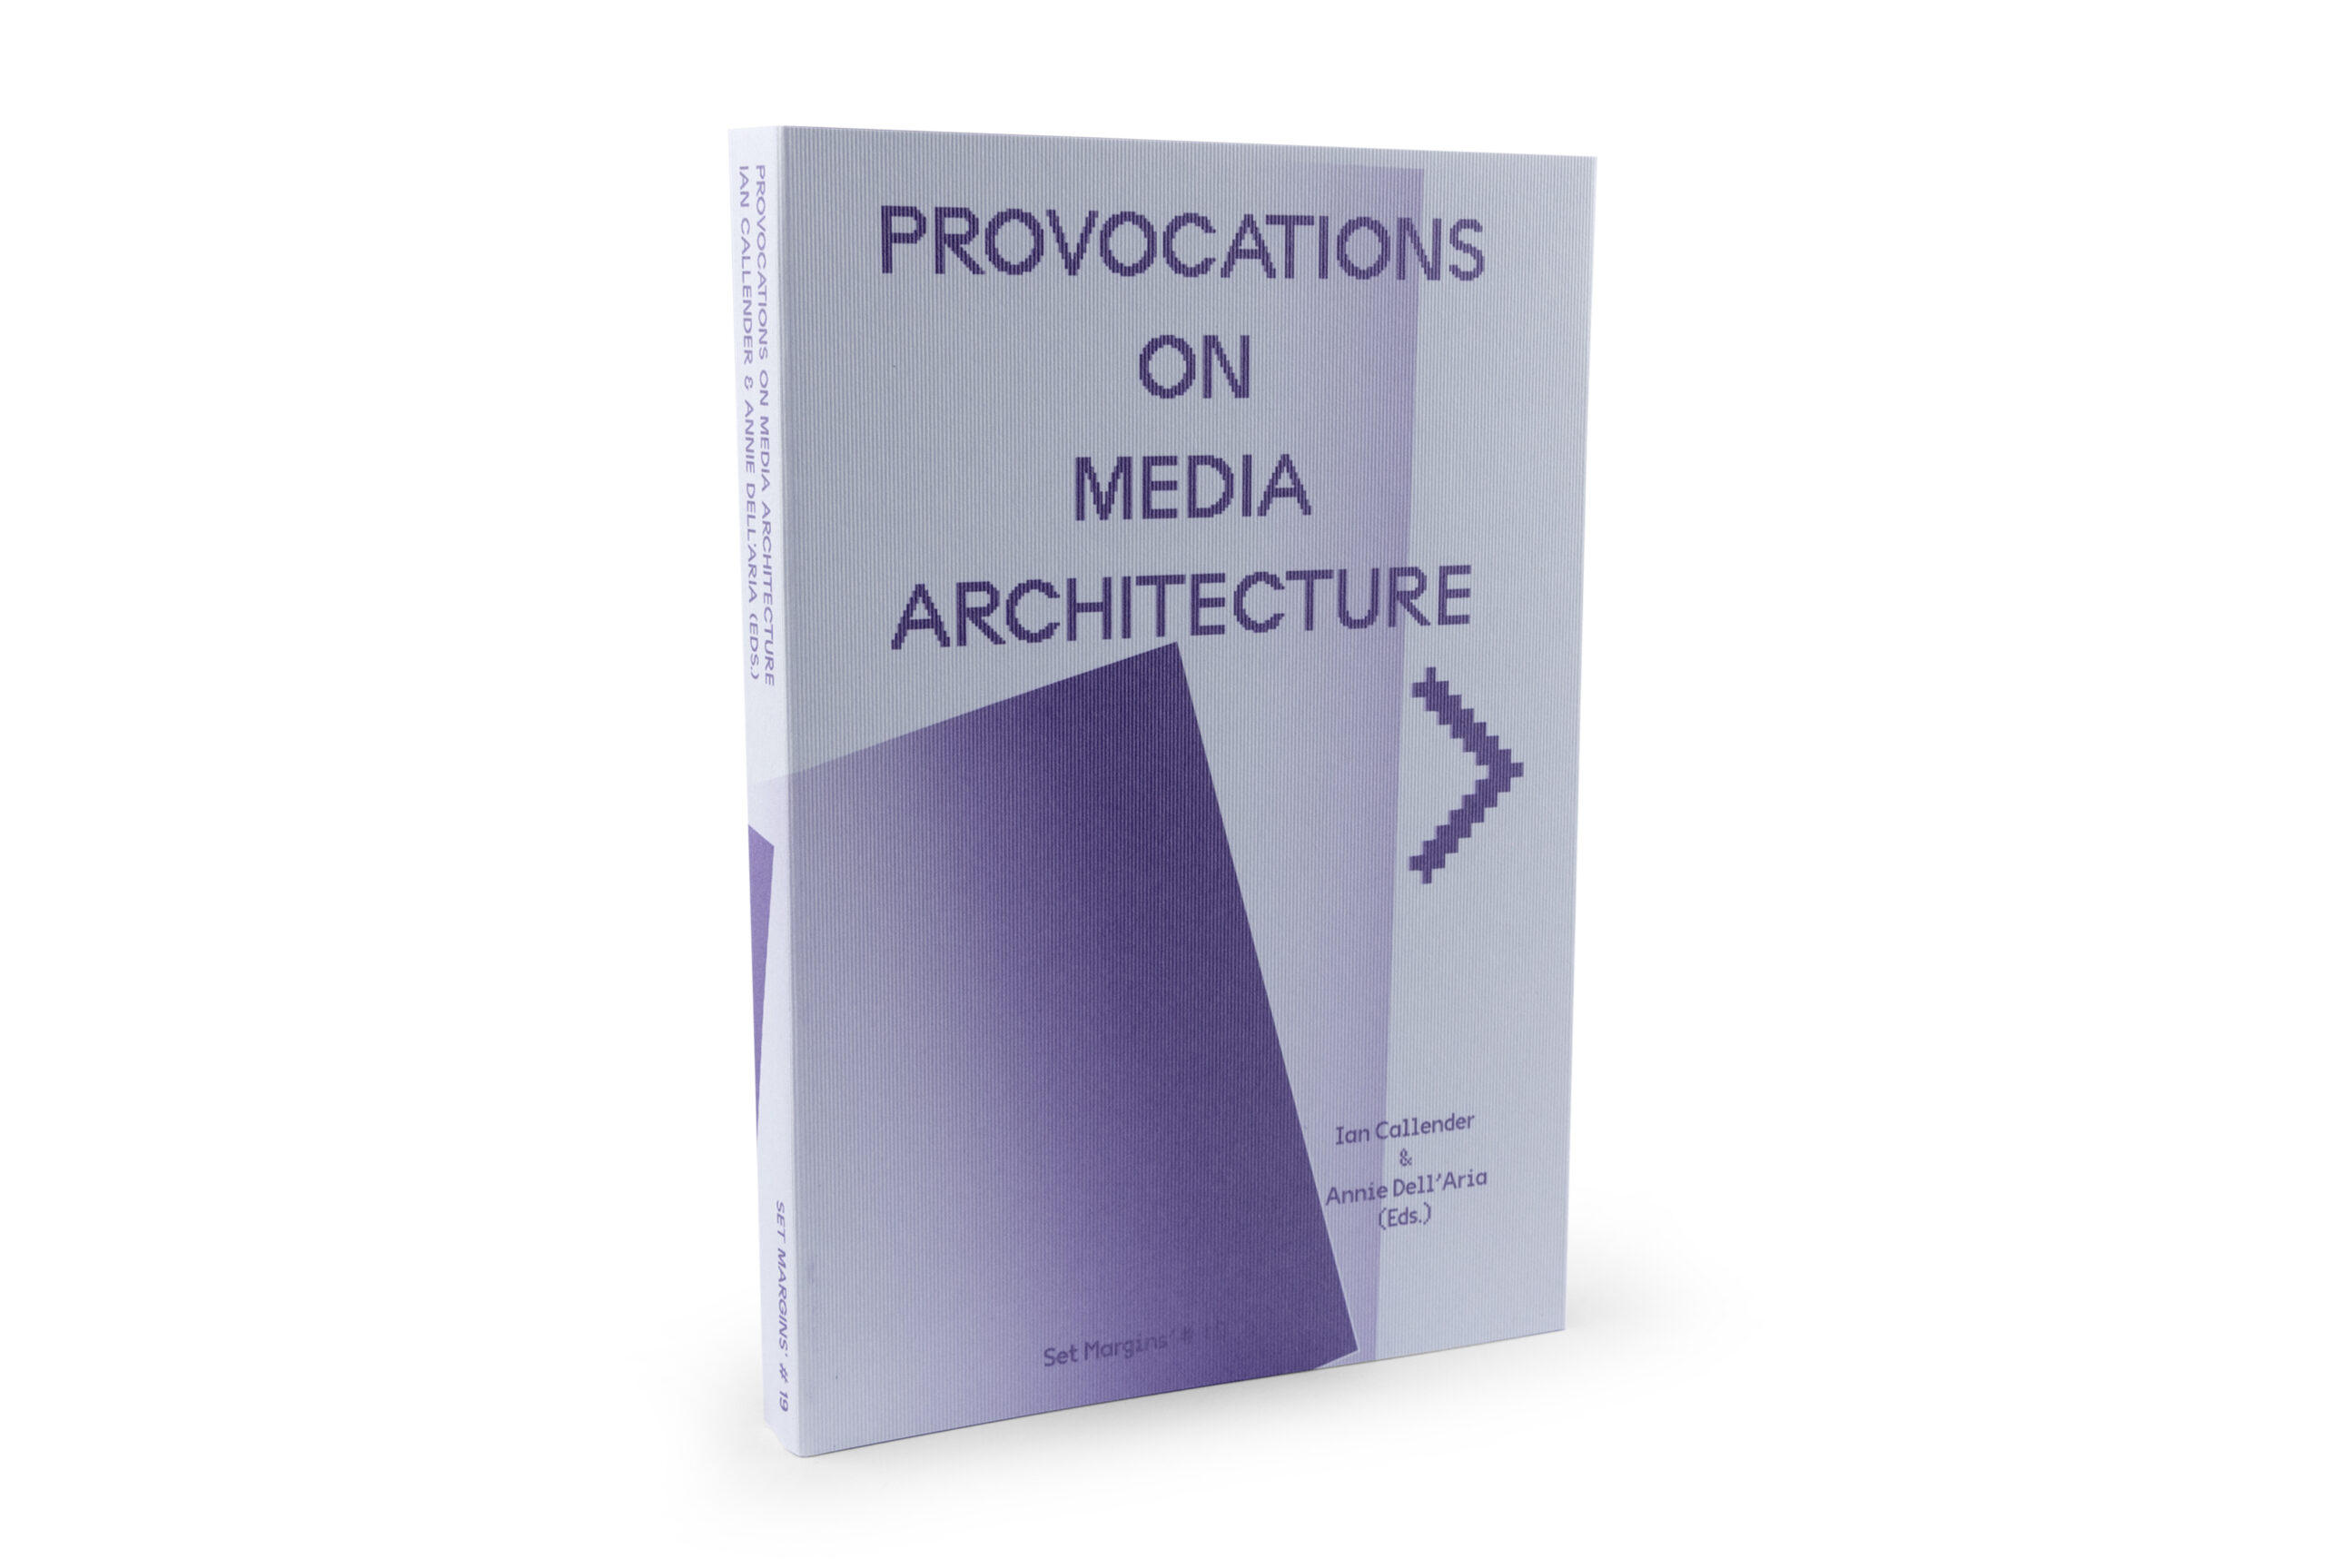 Provocations on Media Architecture